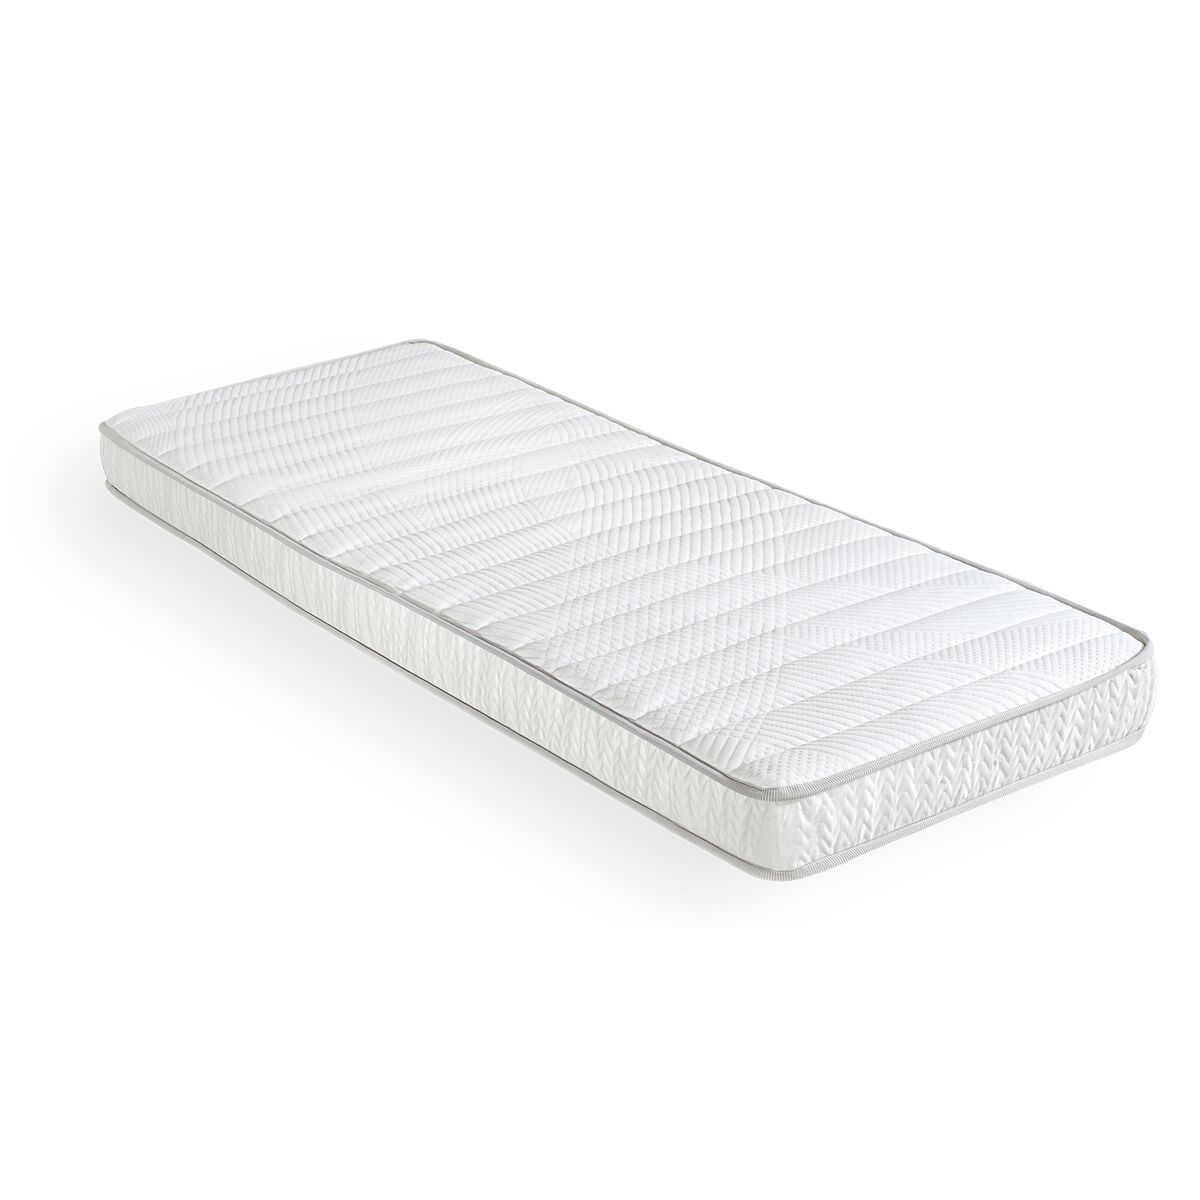 EPEDA Matelas Relaxation Latex confort ferme Cosmo